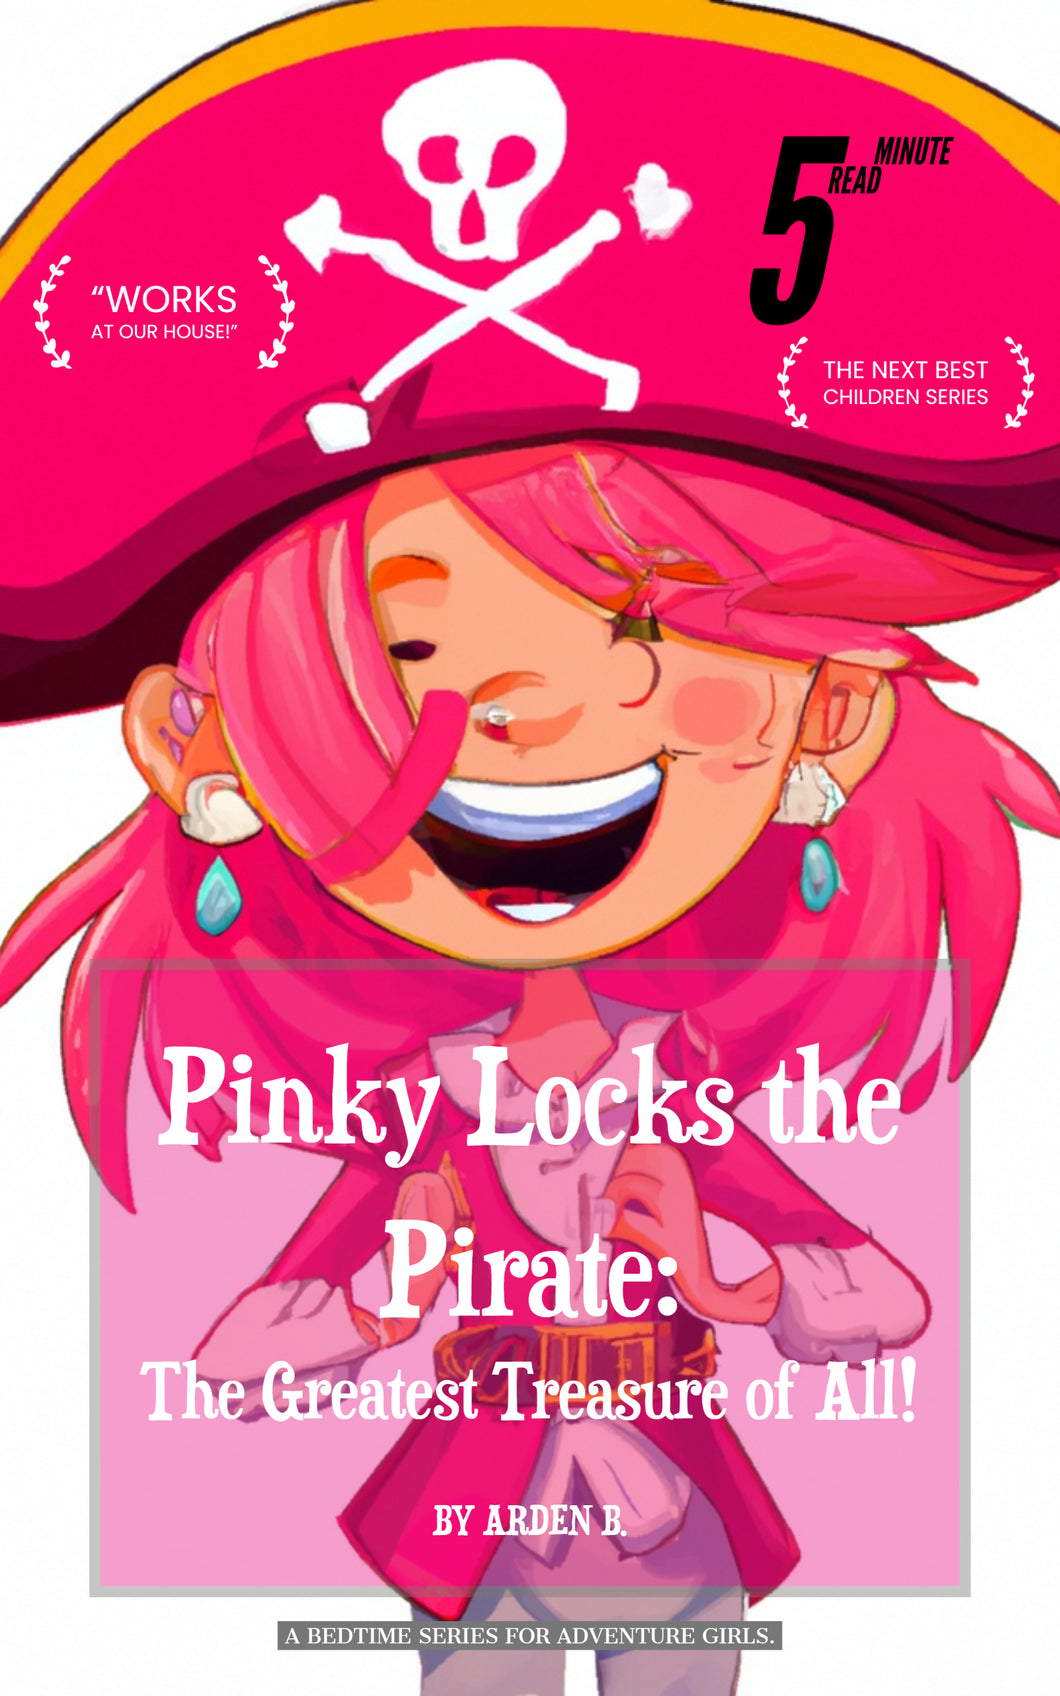 Pinky Locks the Pirate: The Greatest Treasure of All